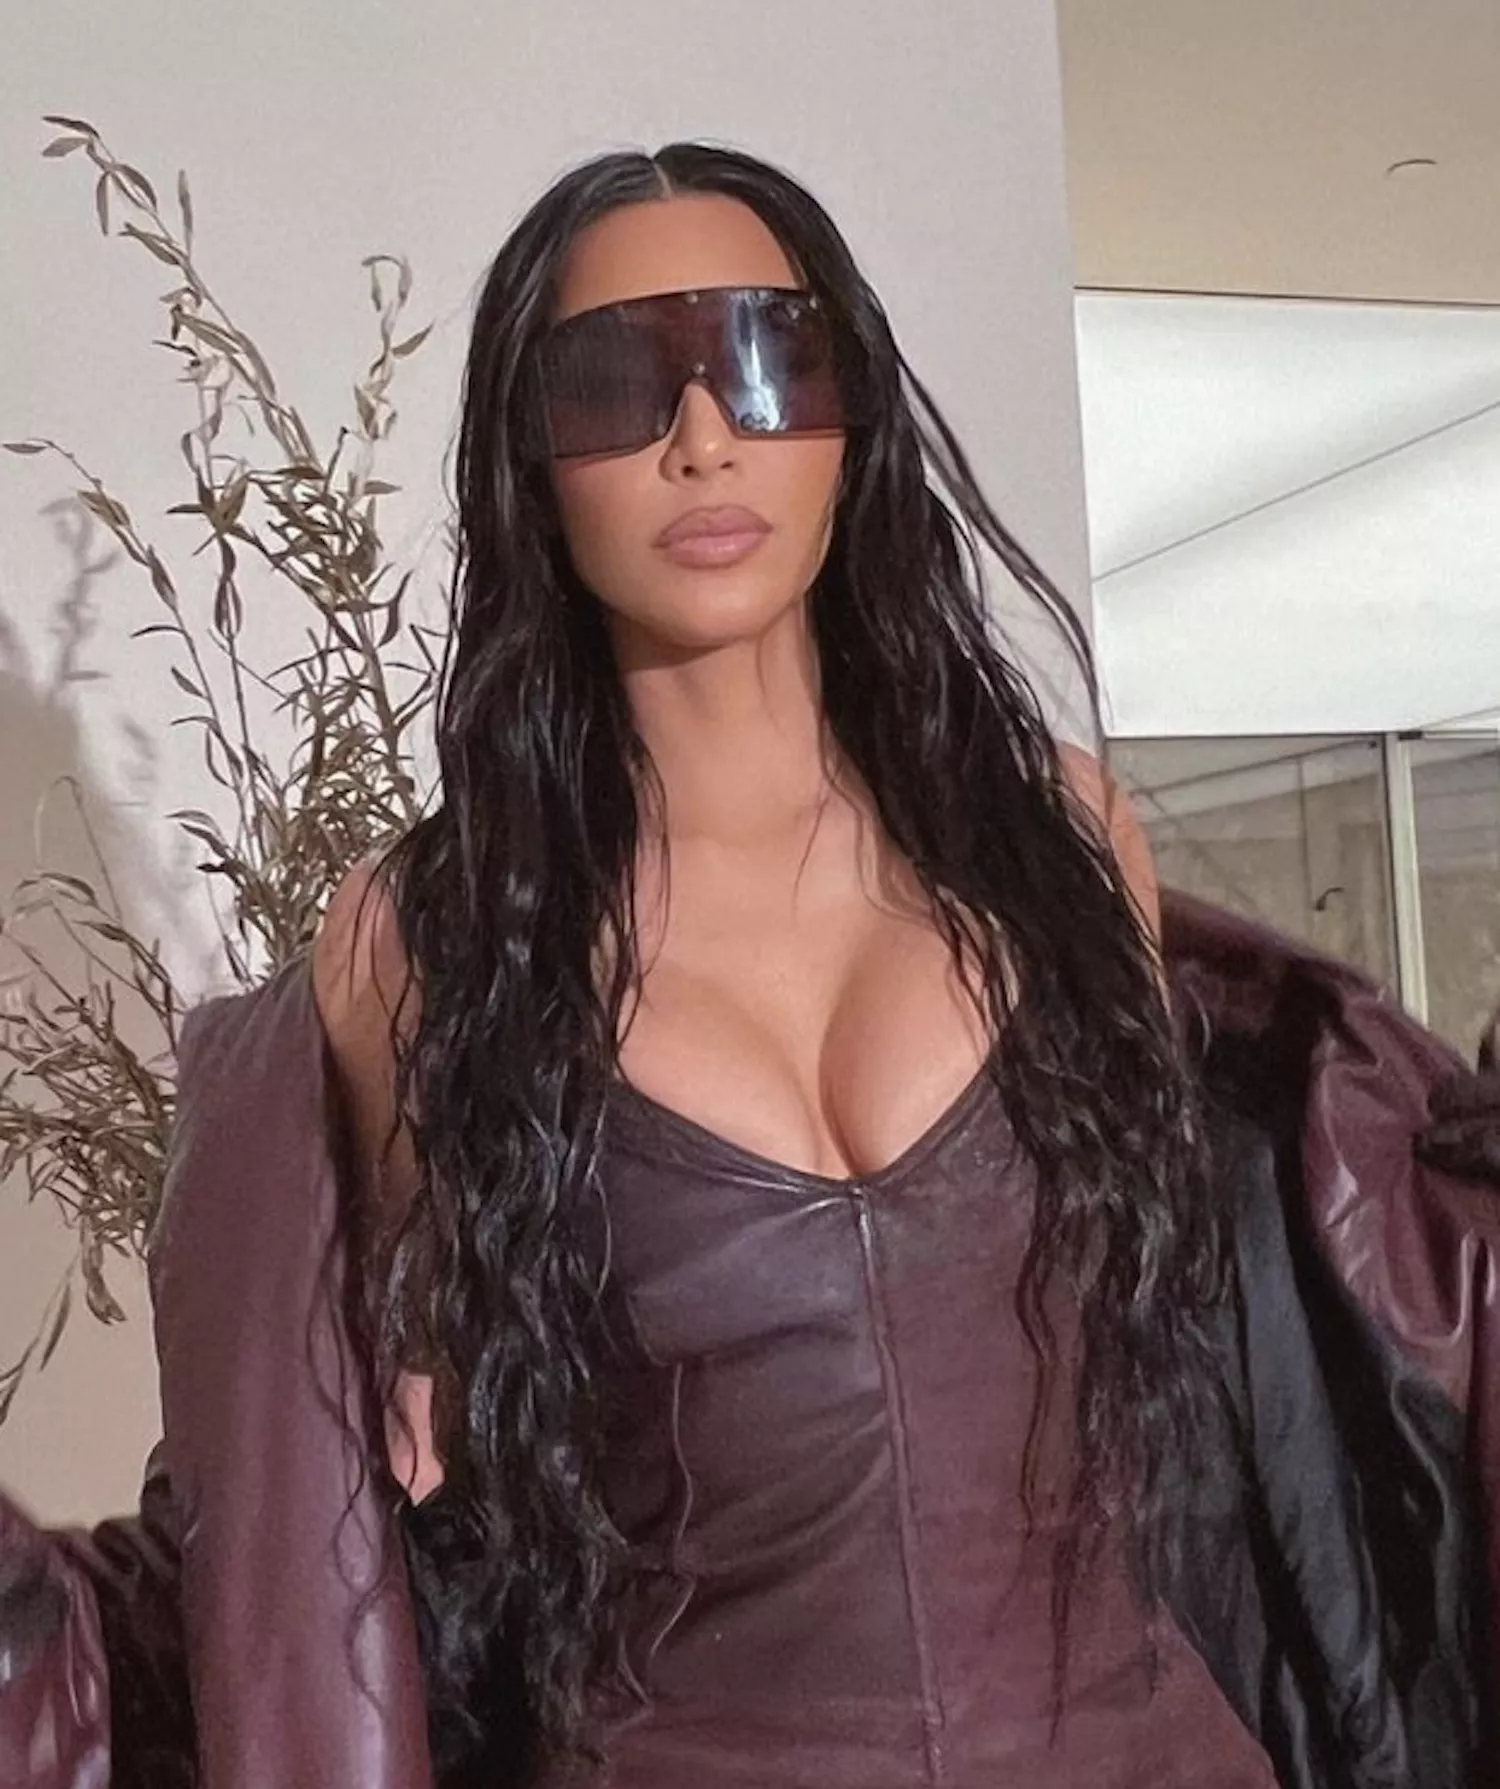 Kim Kardashian's Greatest Hair Moments: Center-Parted Wet Look Waves With Extensions